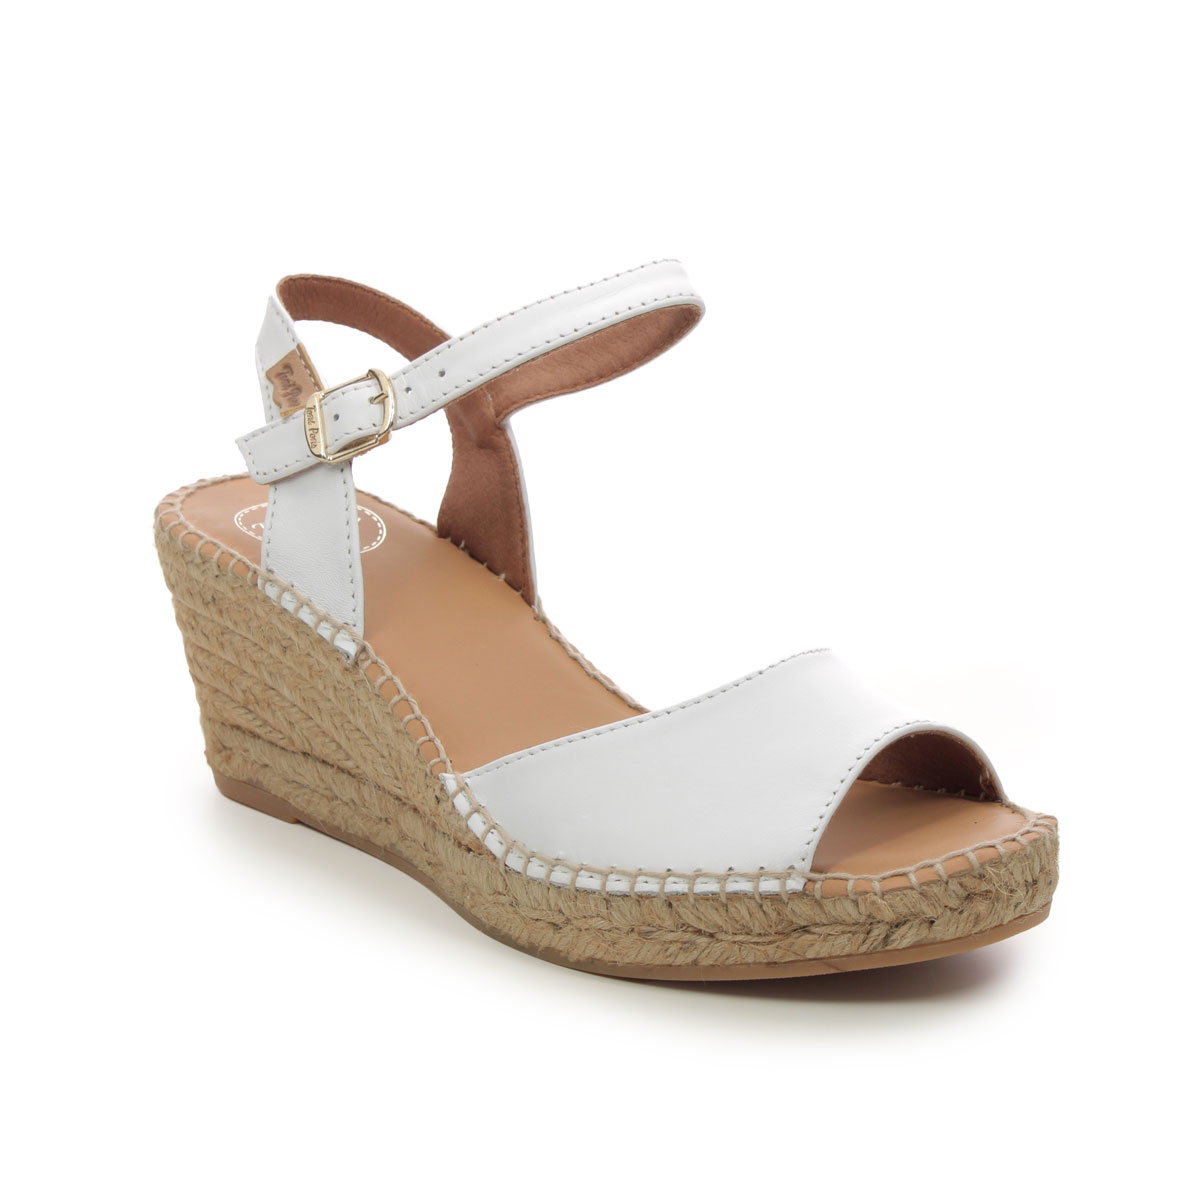 Toni Pons Sia P 5 WHITE LEATHER Womens Espadrilles 4008-61 in a Plain Leather in Size 38